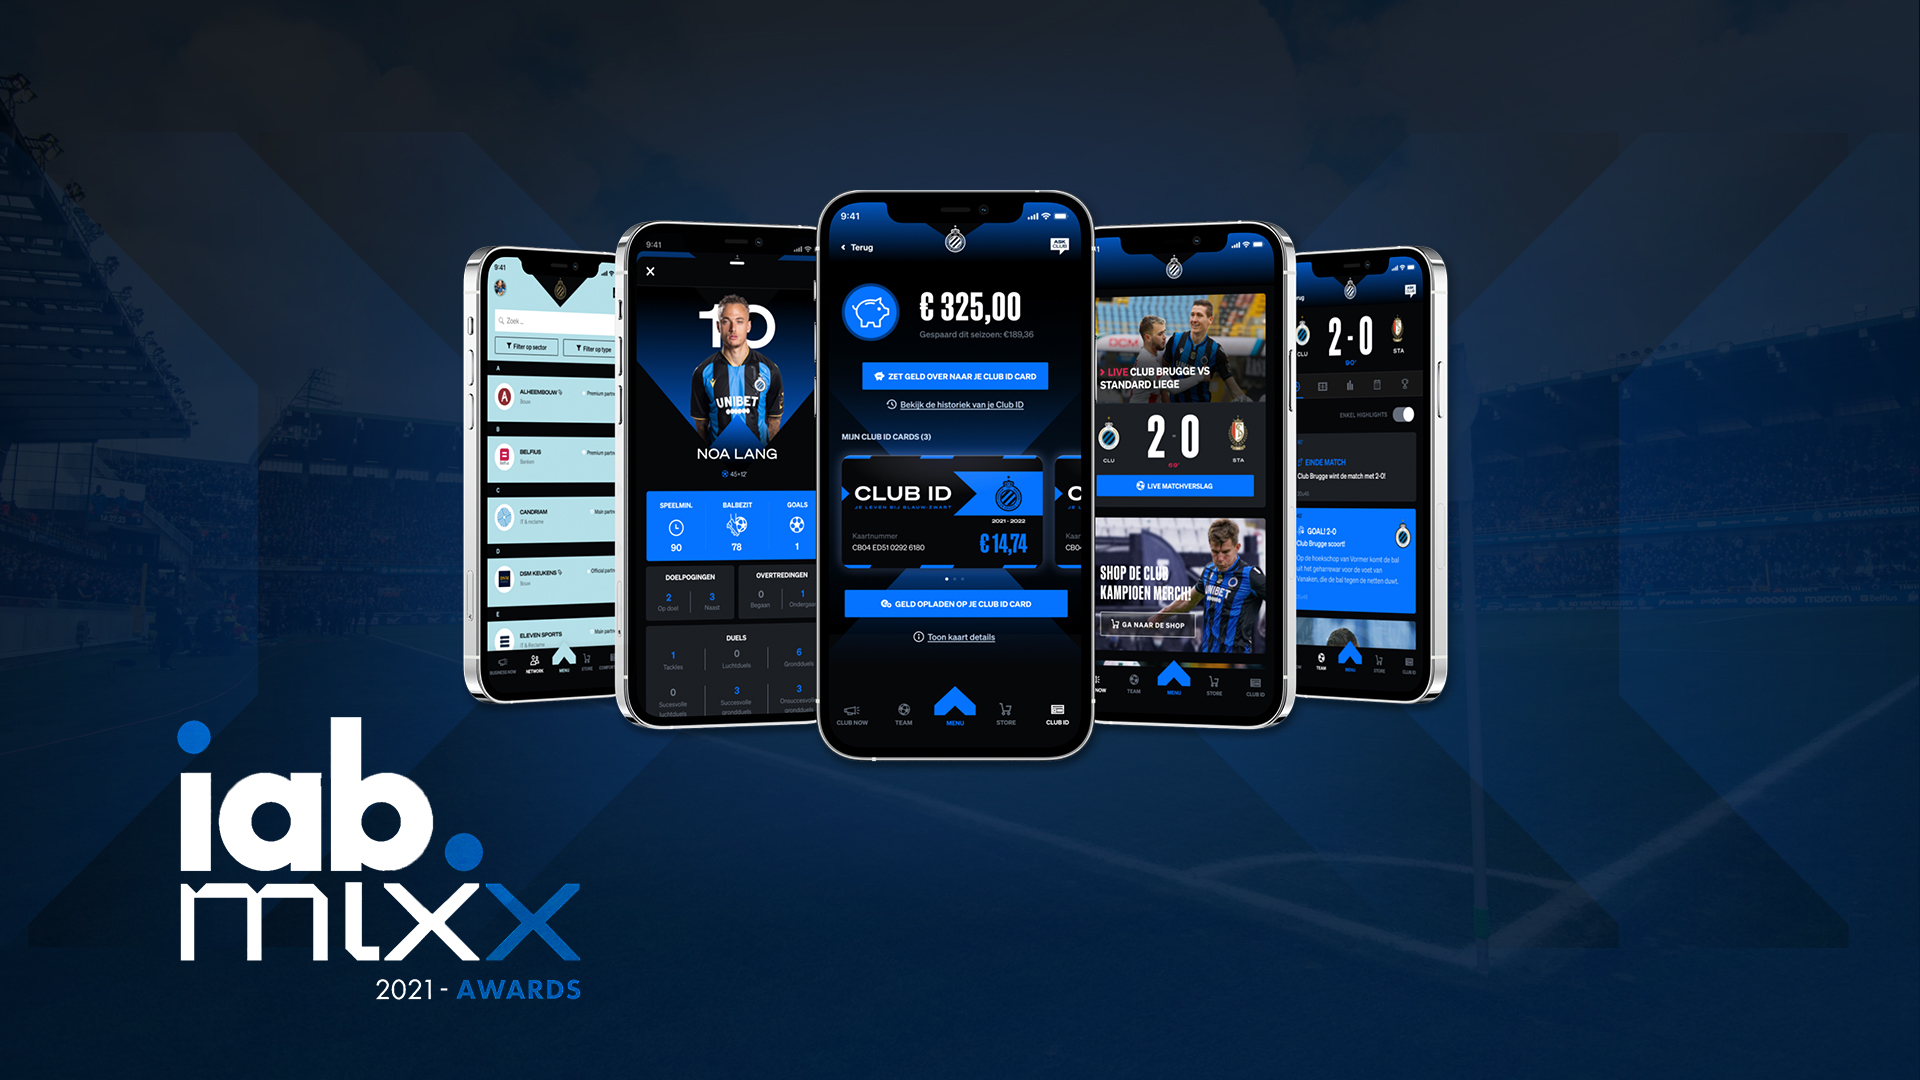 The official Club Brugge fan app secured the Best Digital User Experience award at the 2021 IAB MIXX Awards. This project was in association with digital product studio Bits of Love, who designed and developed the application for football team and media brand Club Brugge.